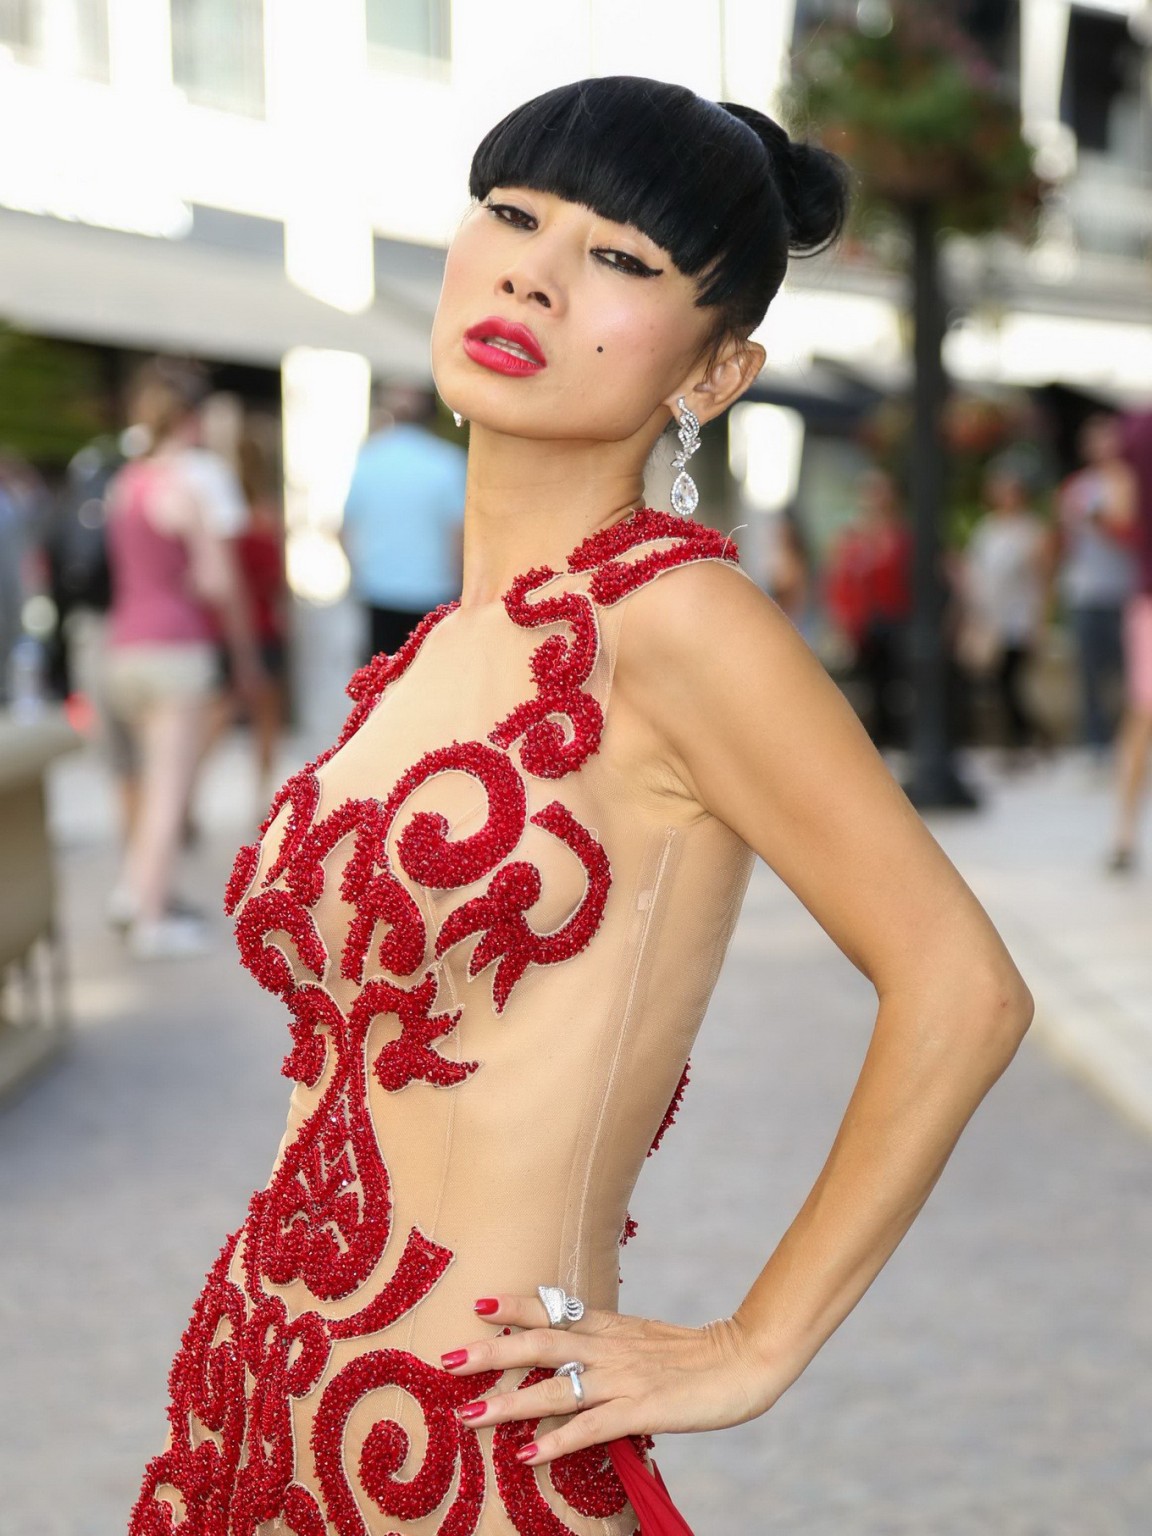 Bai Ling seethru showing boobs and hairy pussy outdoor #75151257